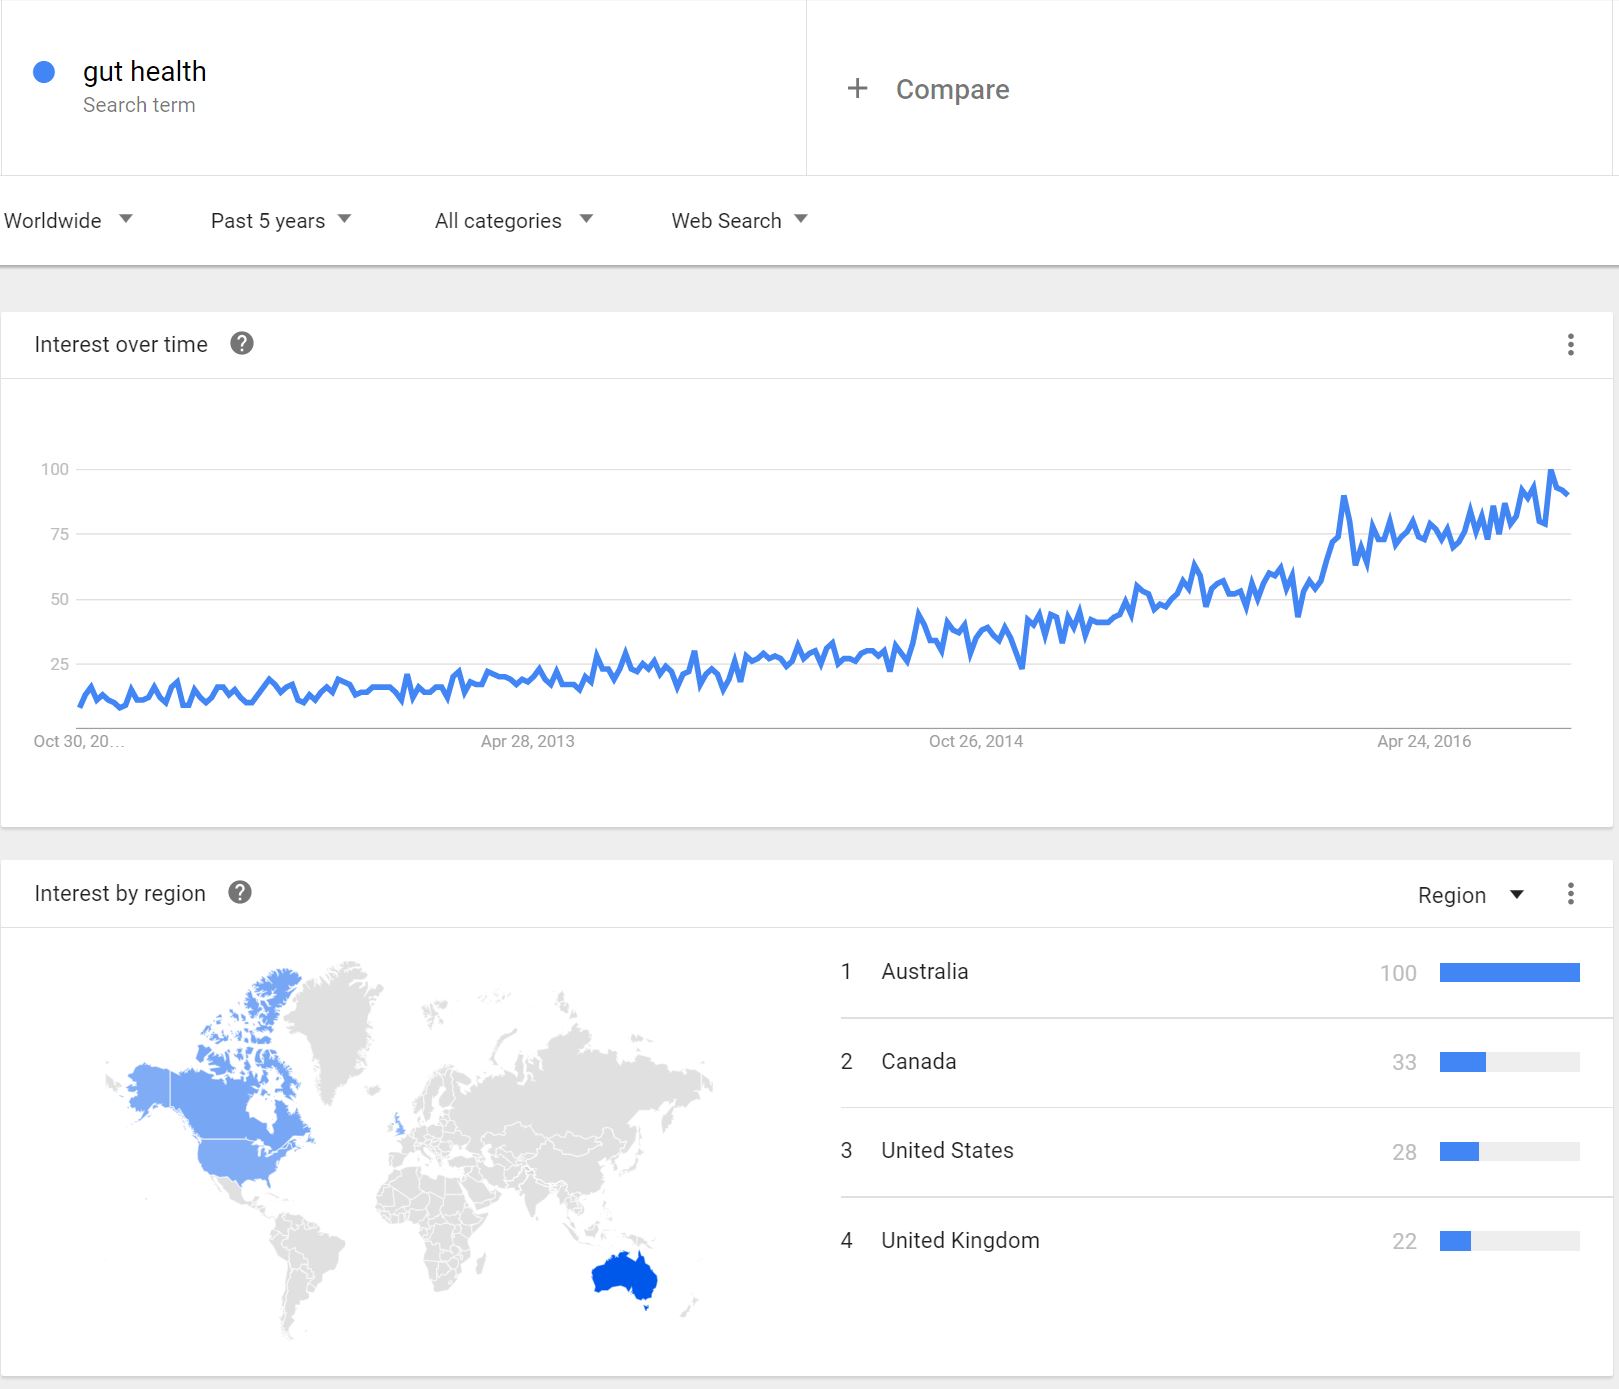 Google Trends for Gut Health Search